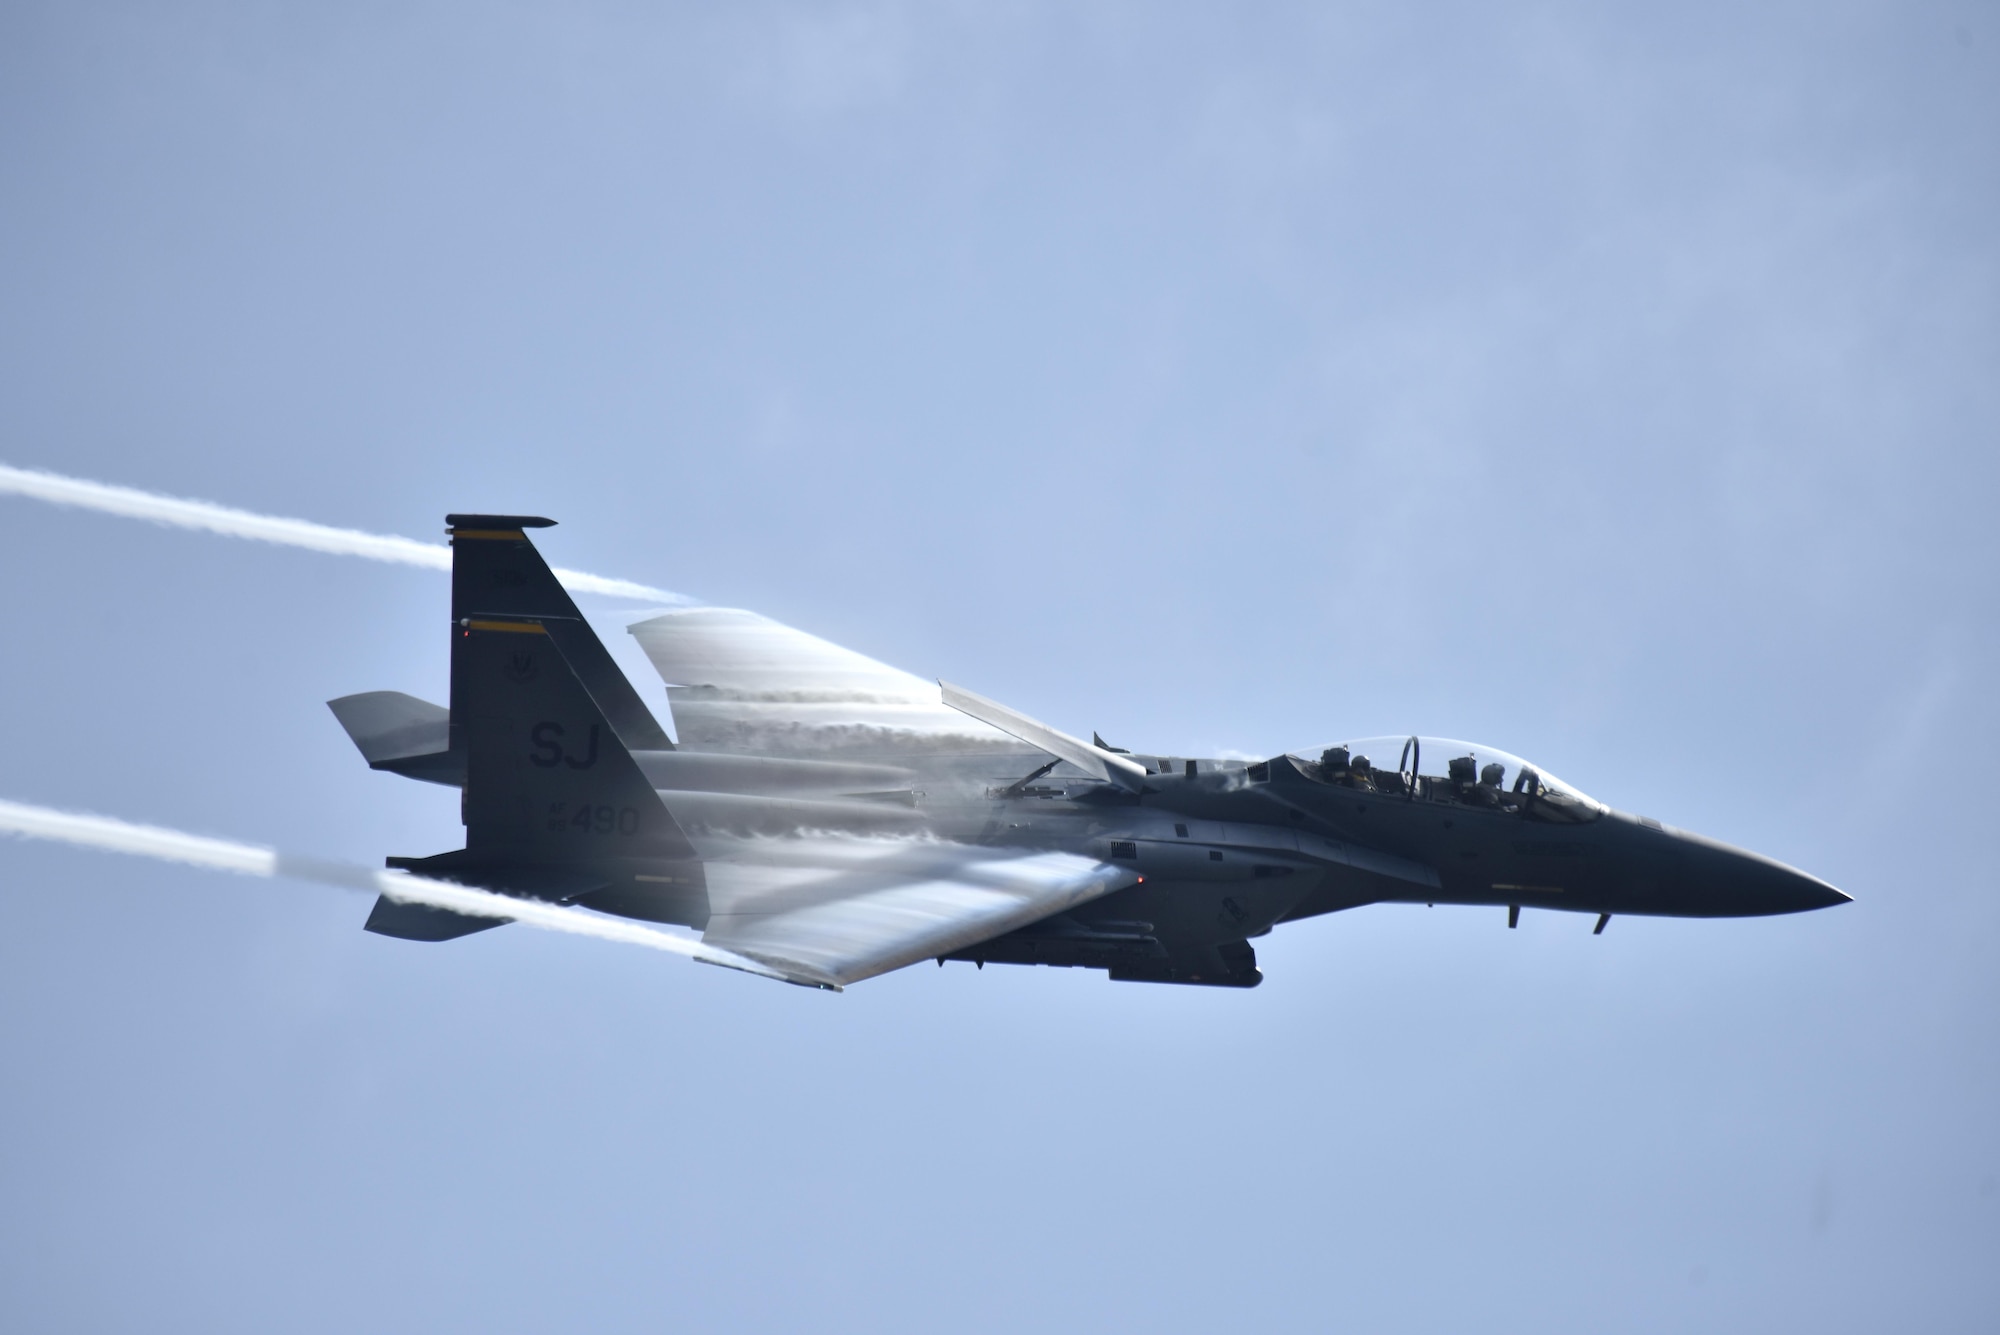 An F-15E Strike Eagle flies over the crowd during the Wings Over Wayne Air Show, May 21, 2017, at Seymour Johnson Air Force Base, North Carolina. Later this year, the 4th Fighter Wing will celebrate its 75th anniversary with a weekend of heritage events and ceremonies. (U.S. Air Force photo by Airman 1st Class Christopher Maldonado)